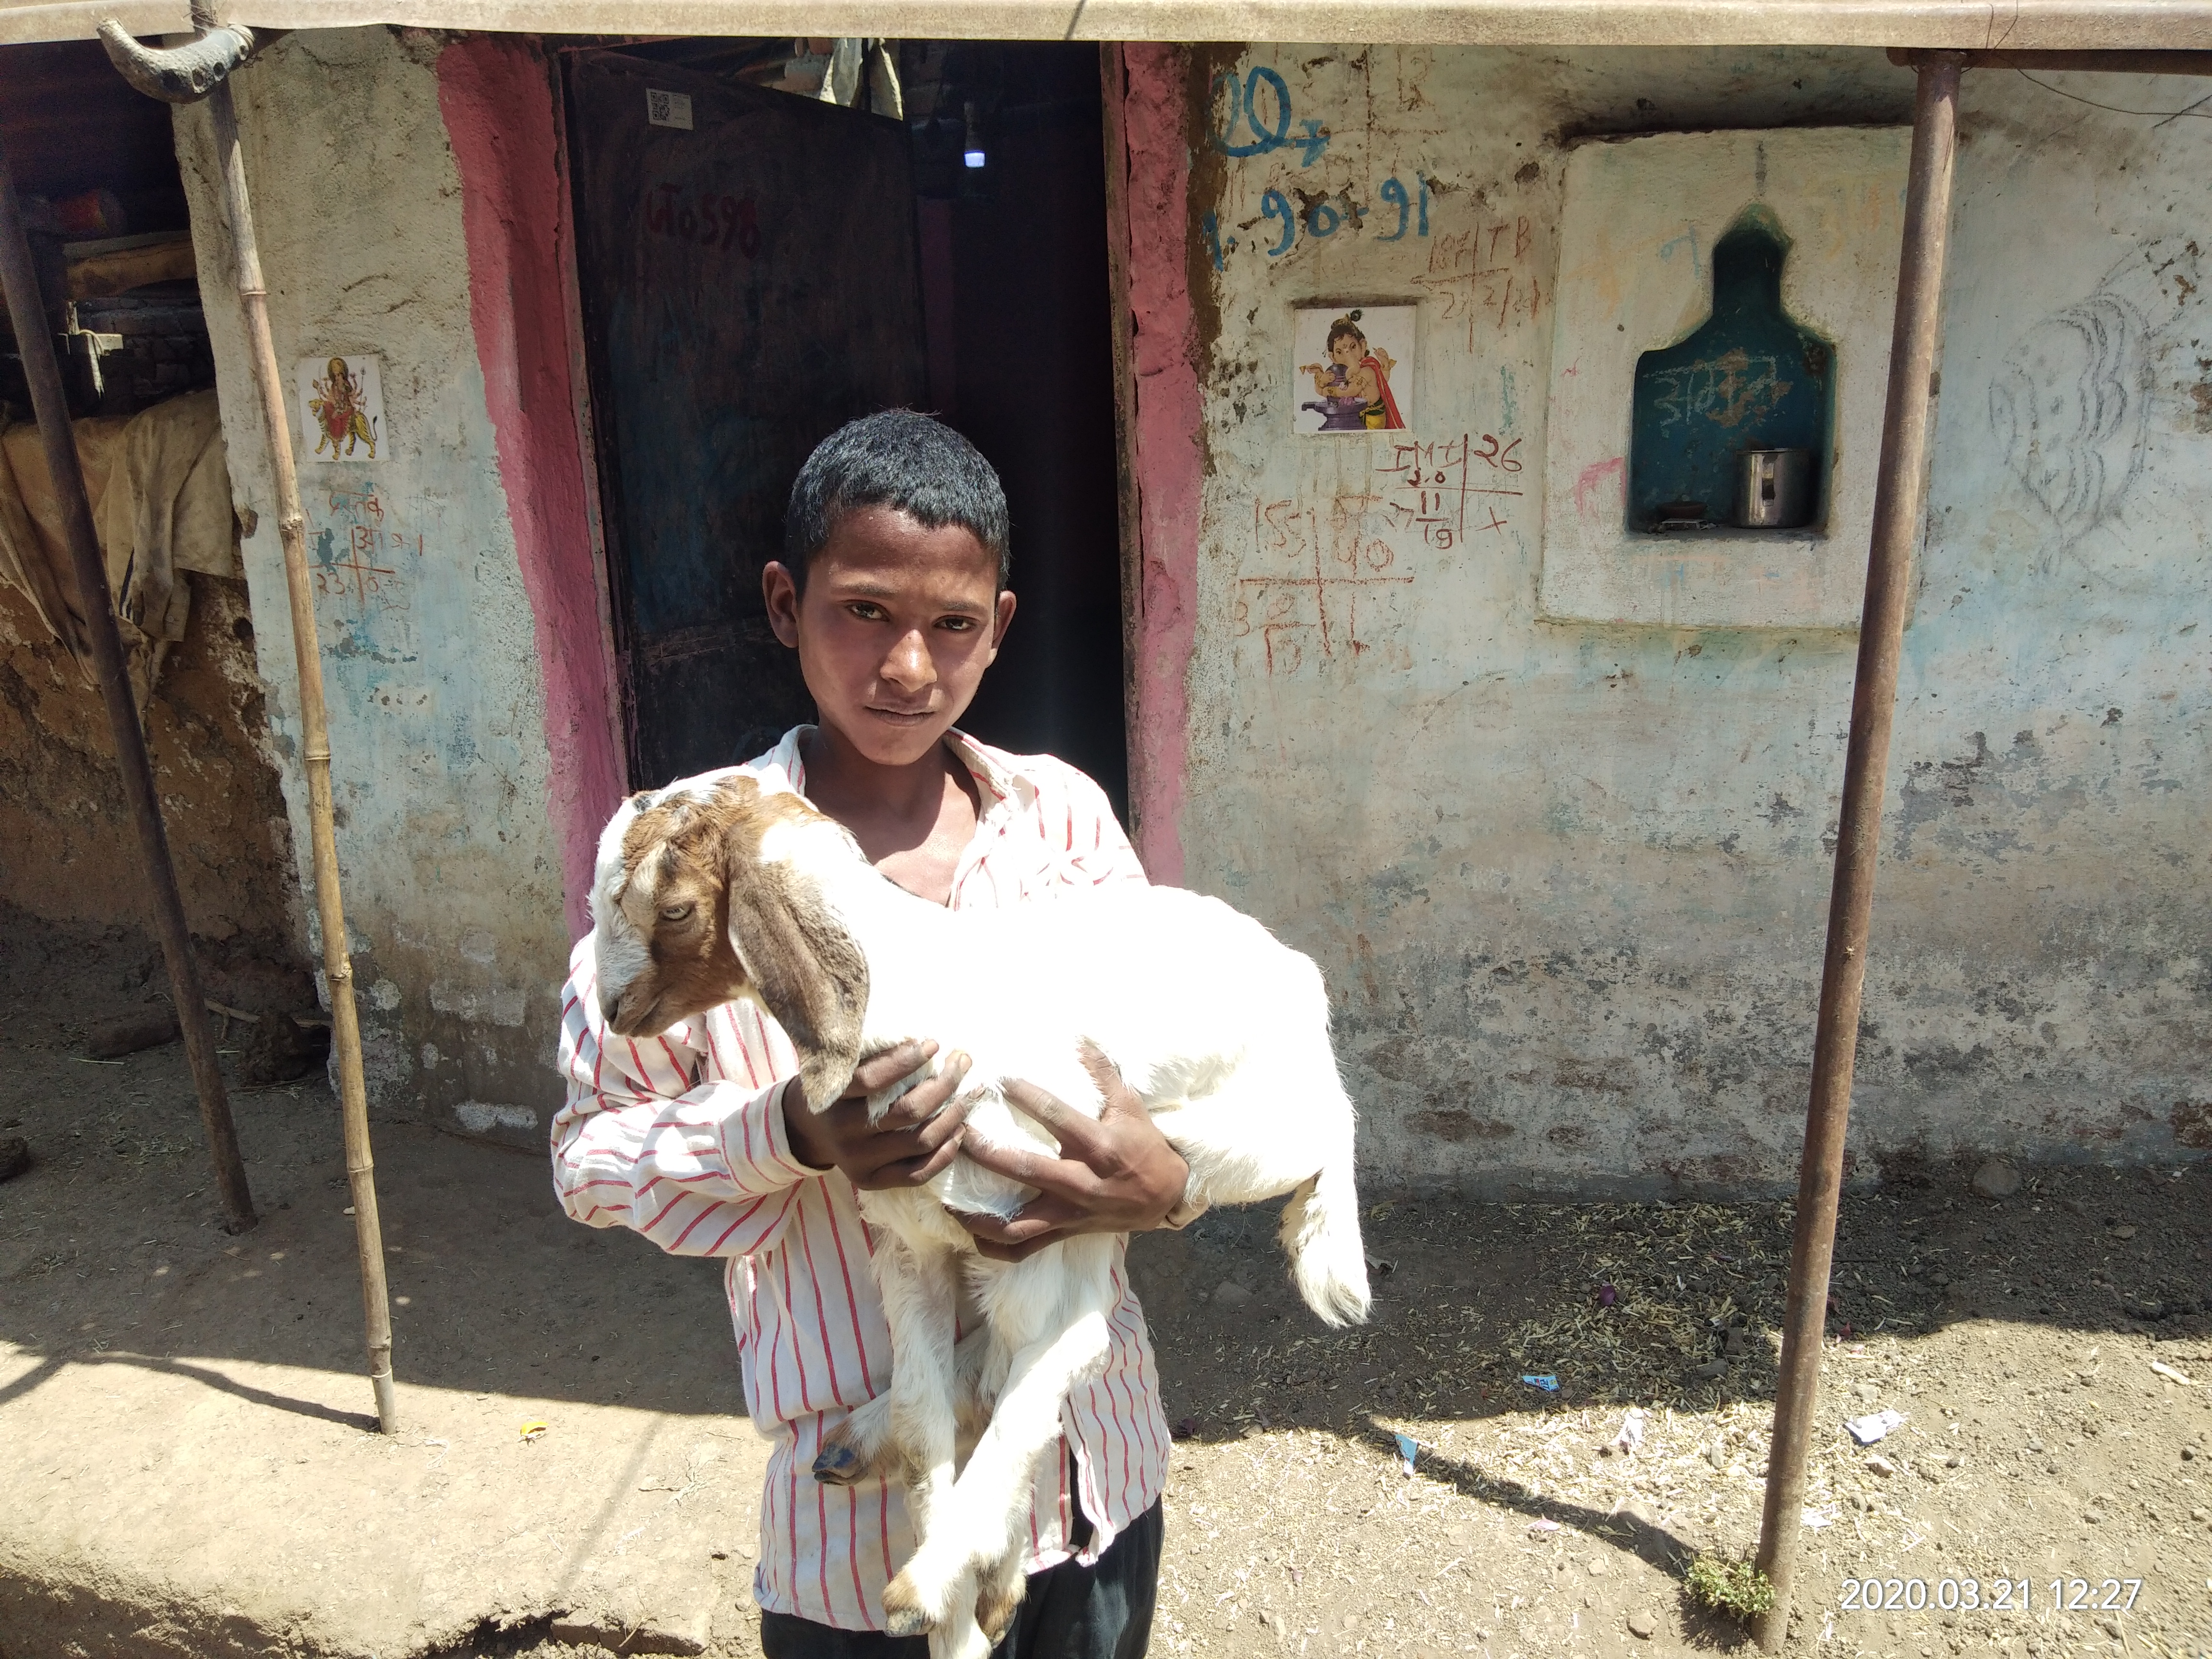 A boy jumped into a well to save a goat child